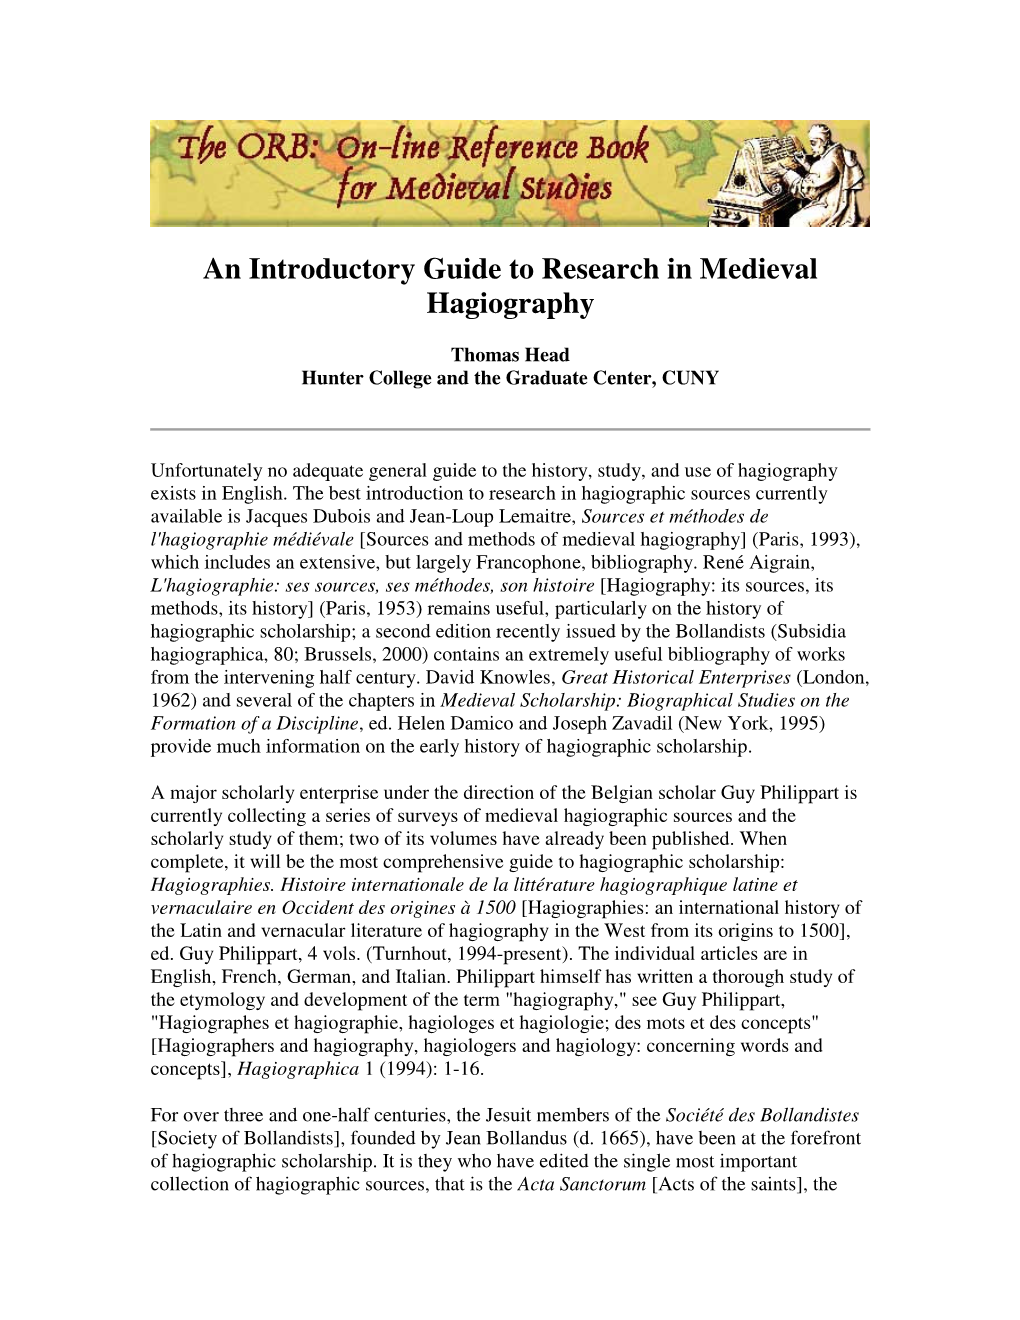 Thomas Head: “An Introductory Guide to Research in Medieval Hagiography”